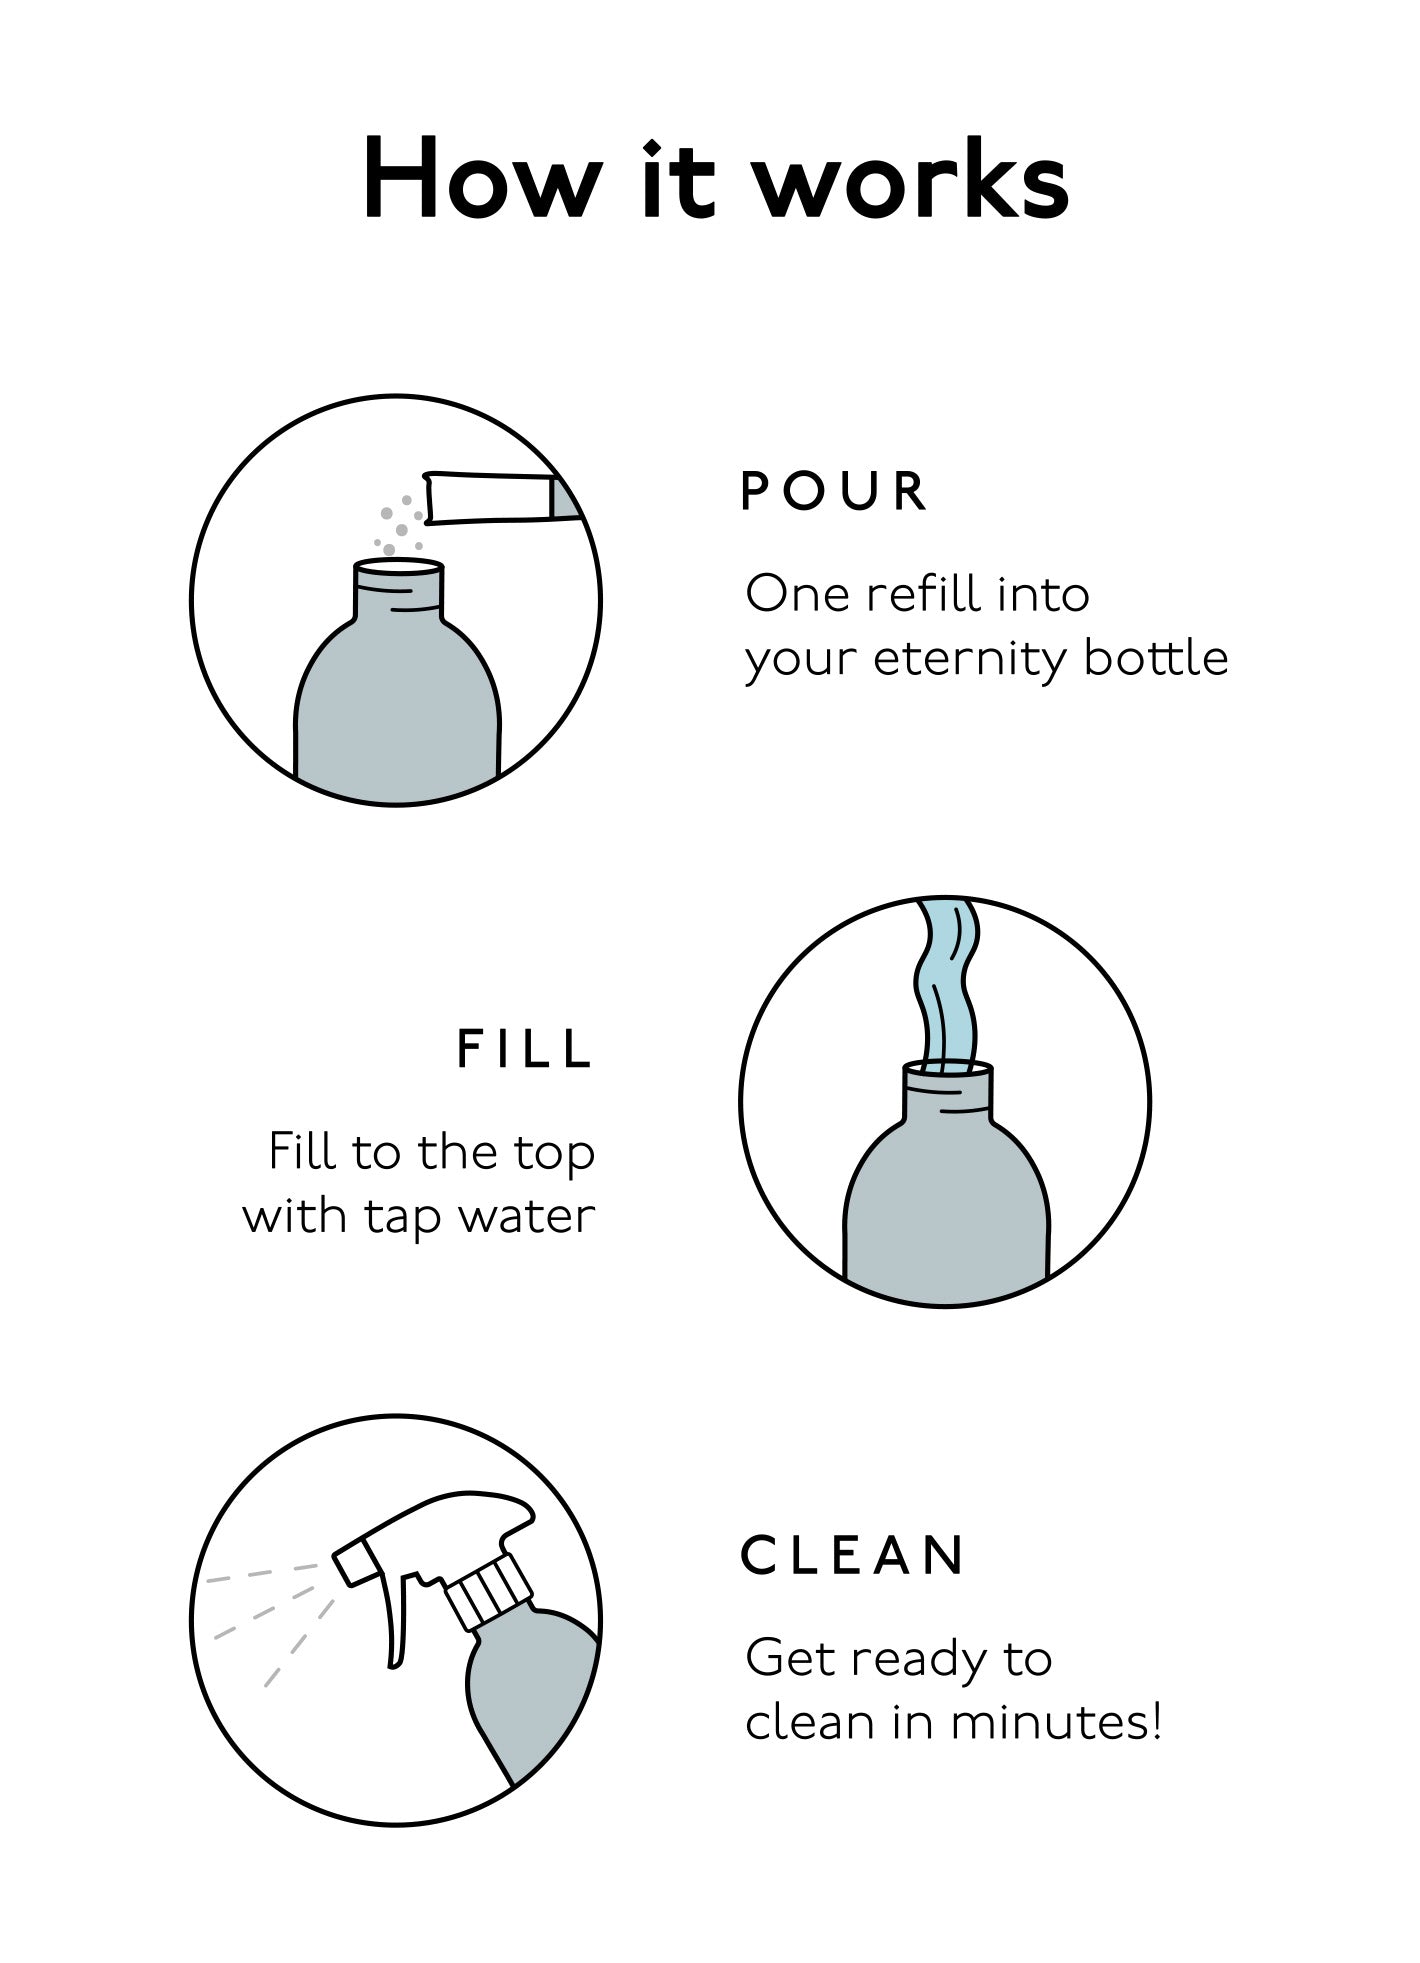 How refillable cleaning products work illustration